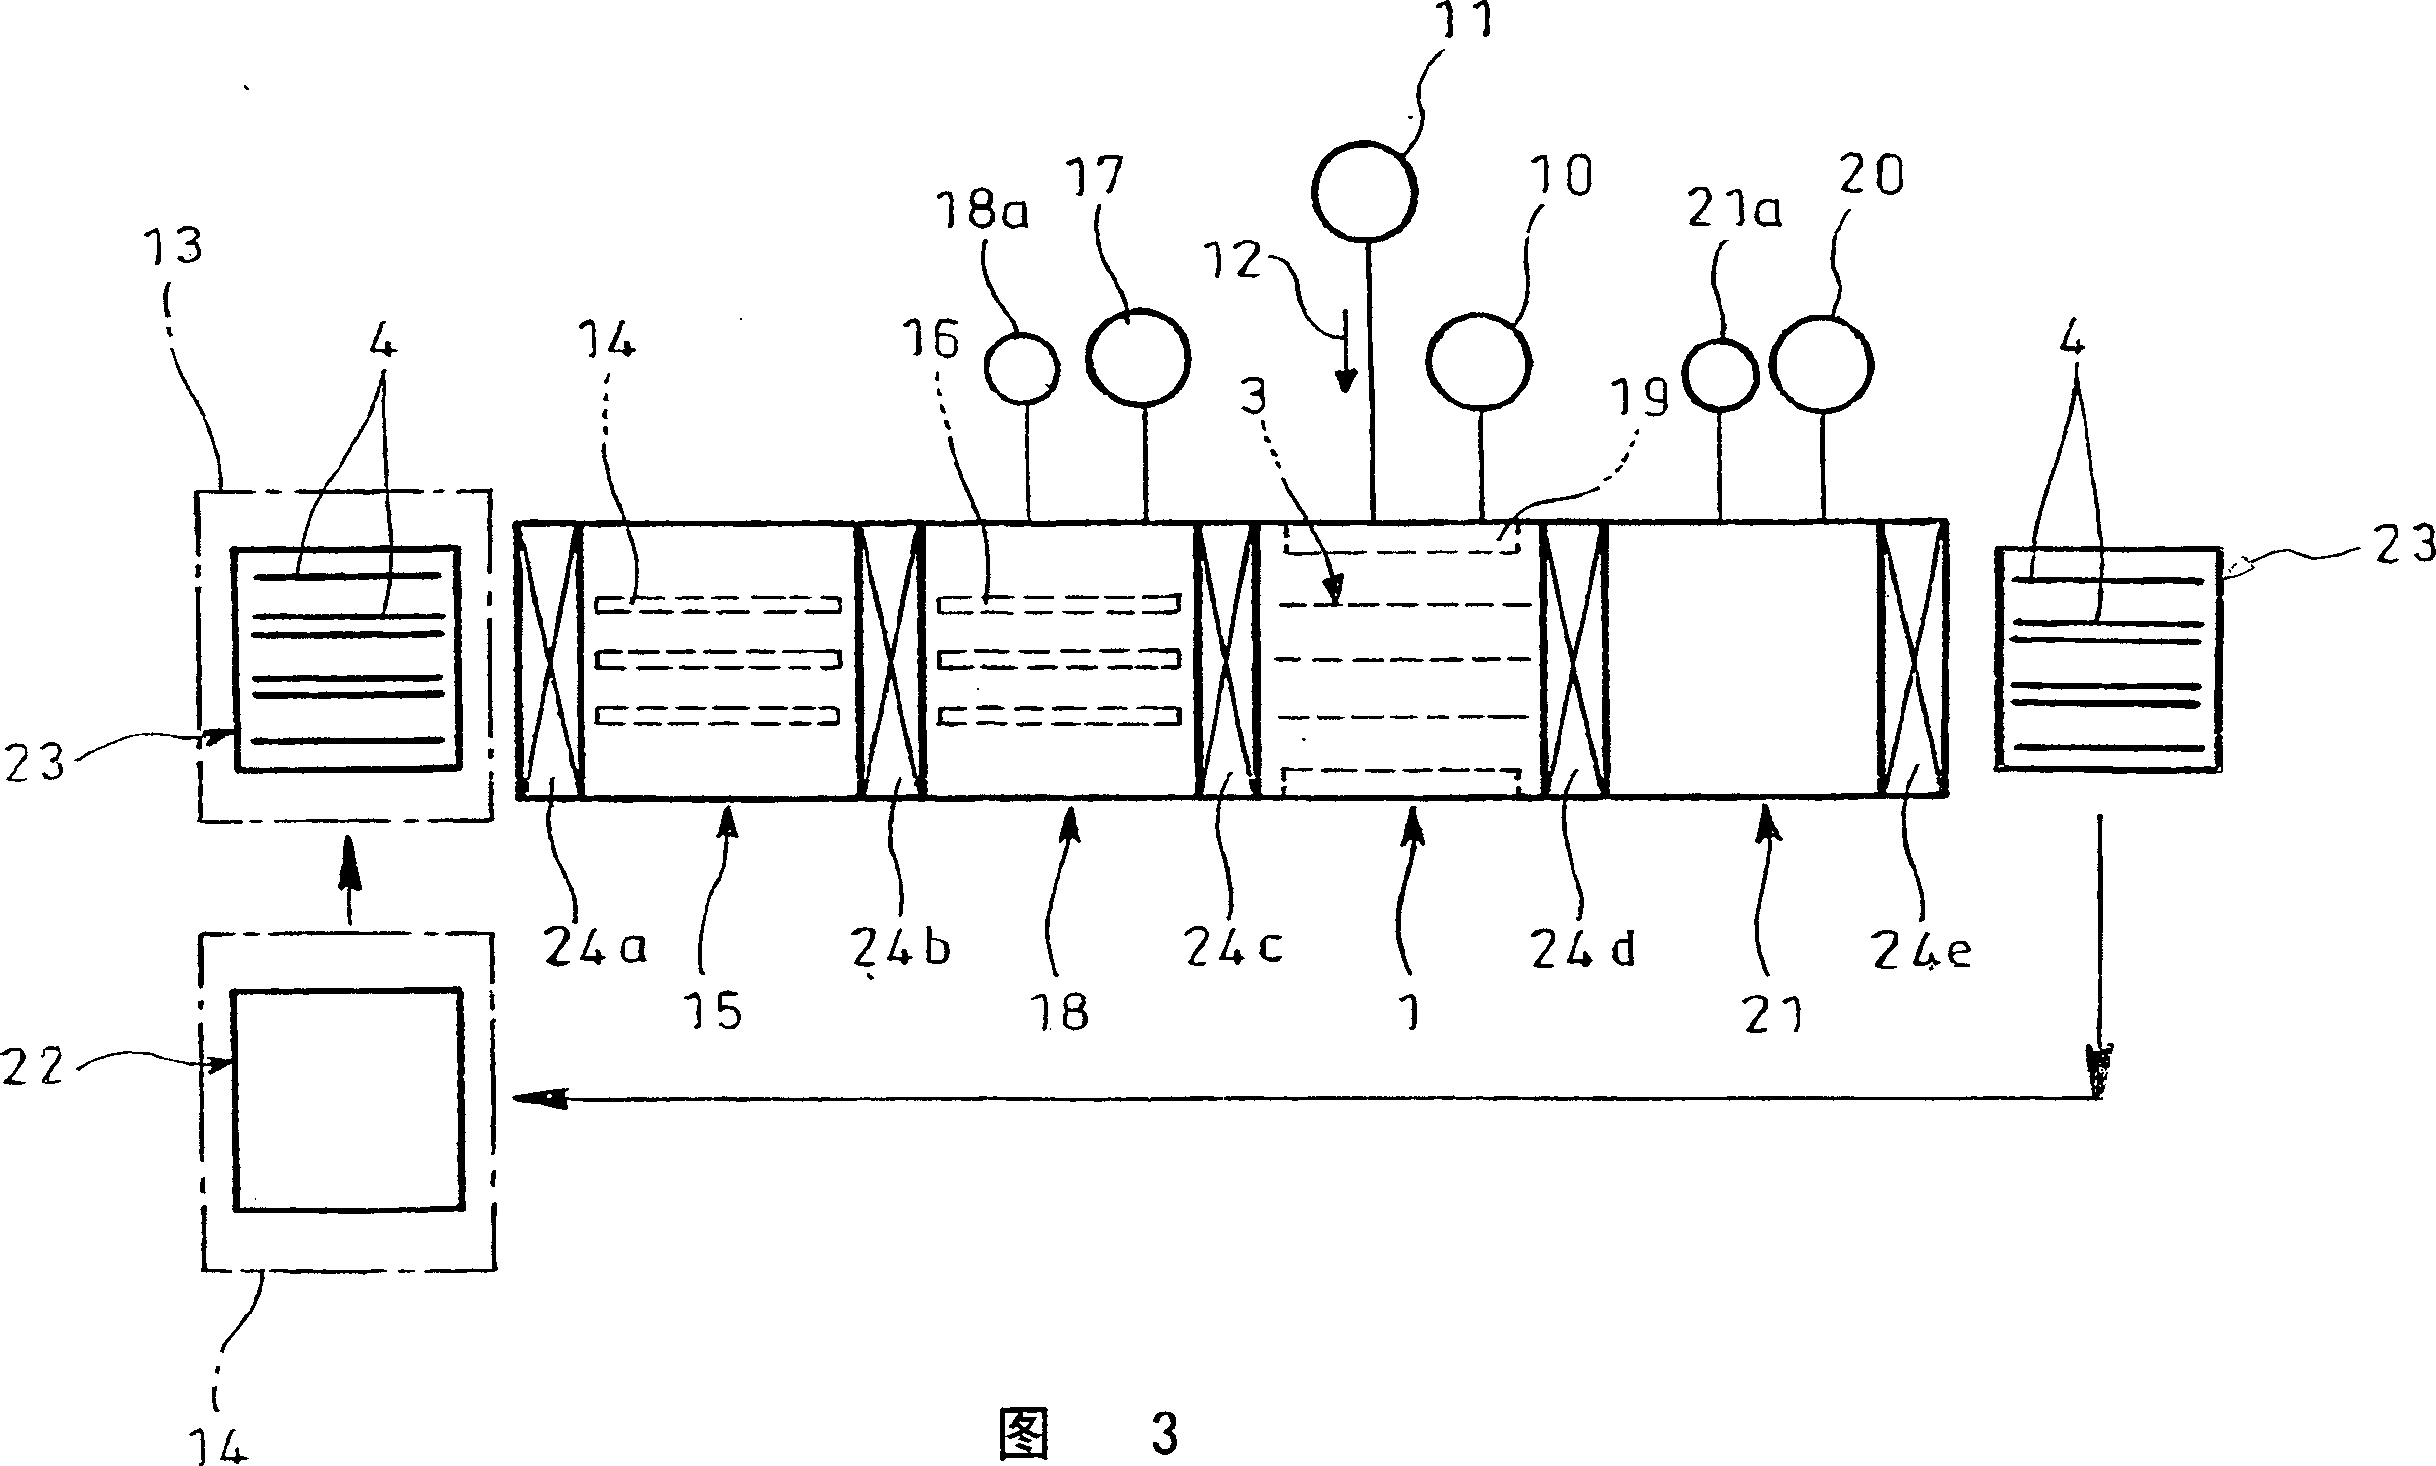 Substrate transfer device for thin-film deposition apparatus